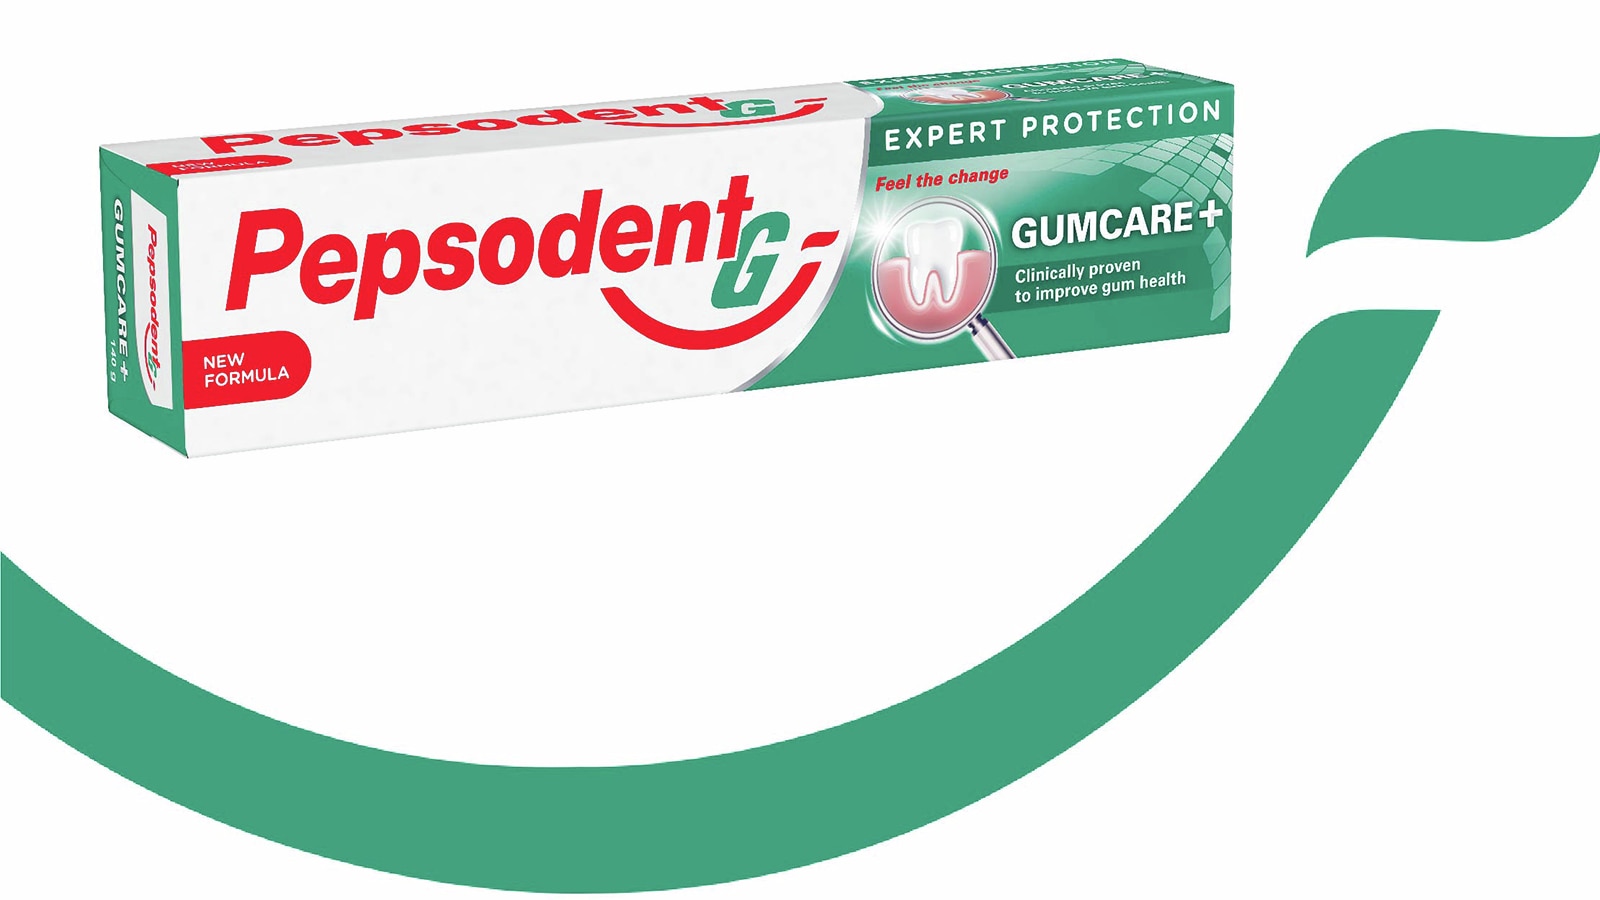 Pepsodent's Marketing Strategies: Building Trust and Loyalty